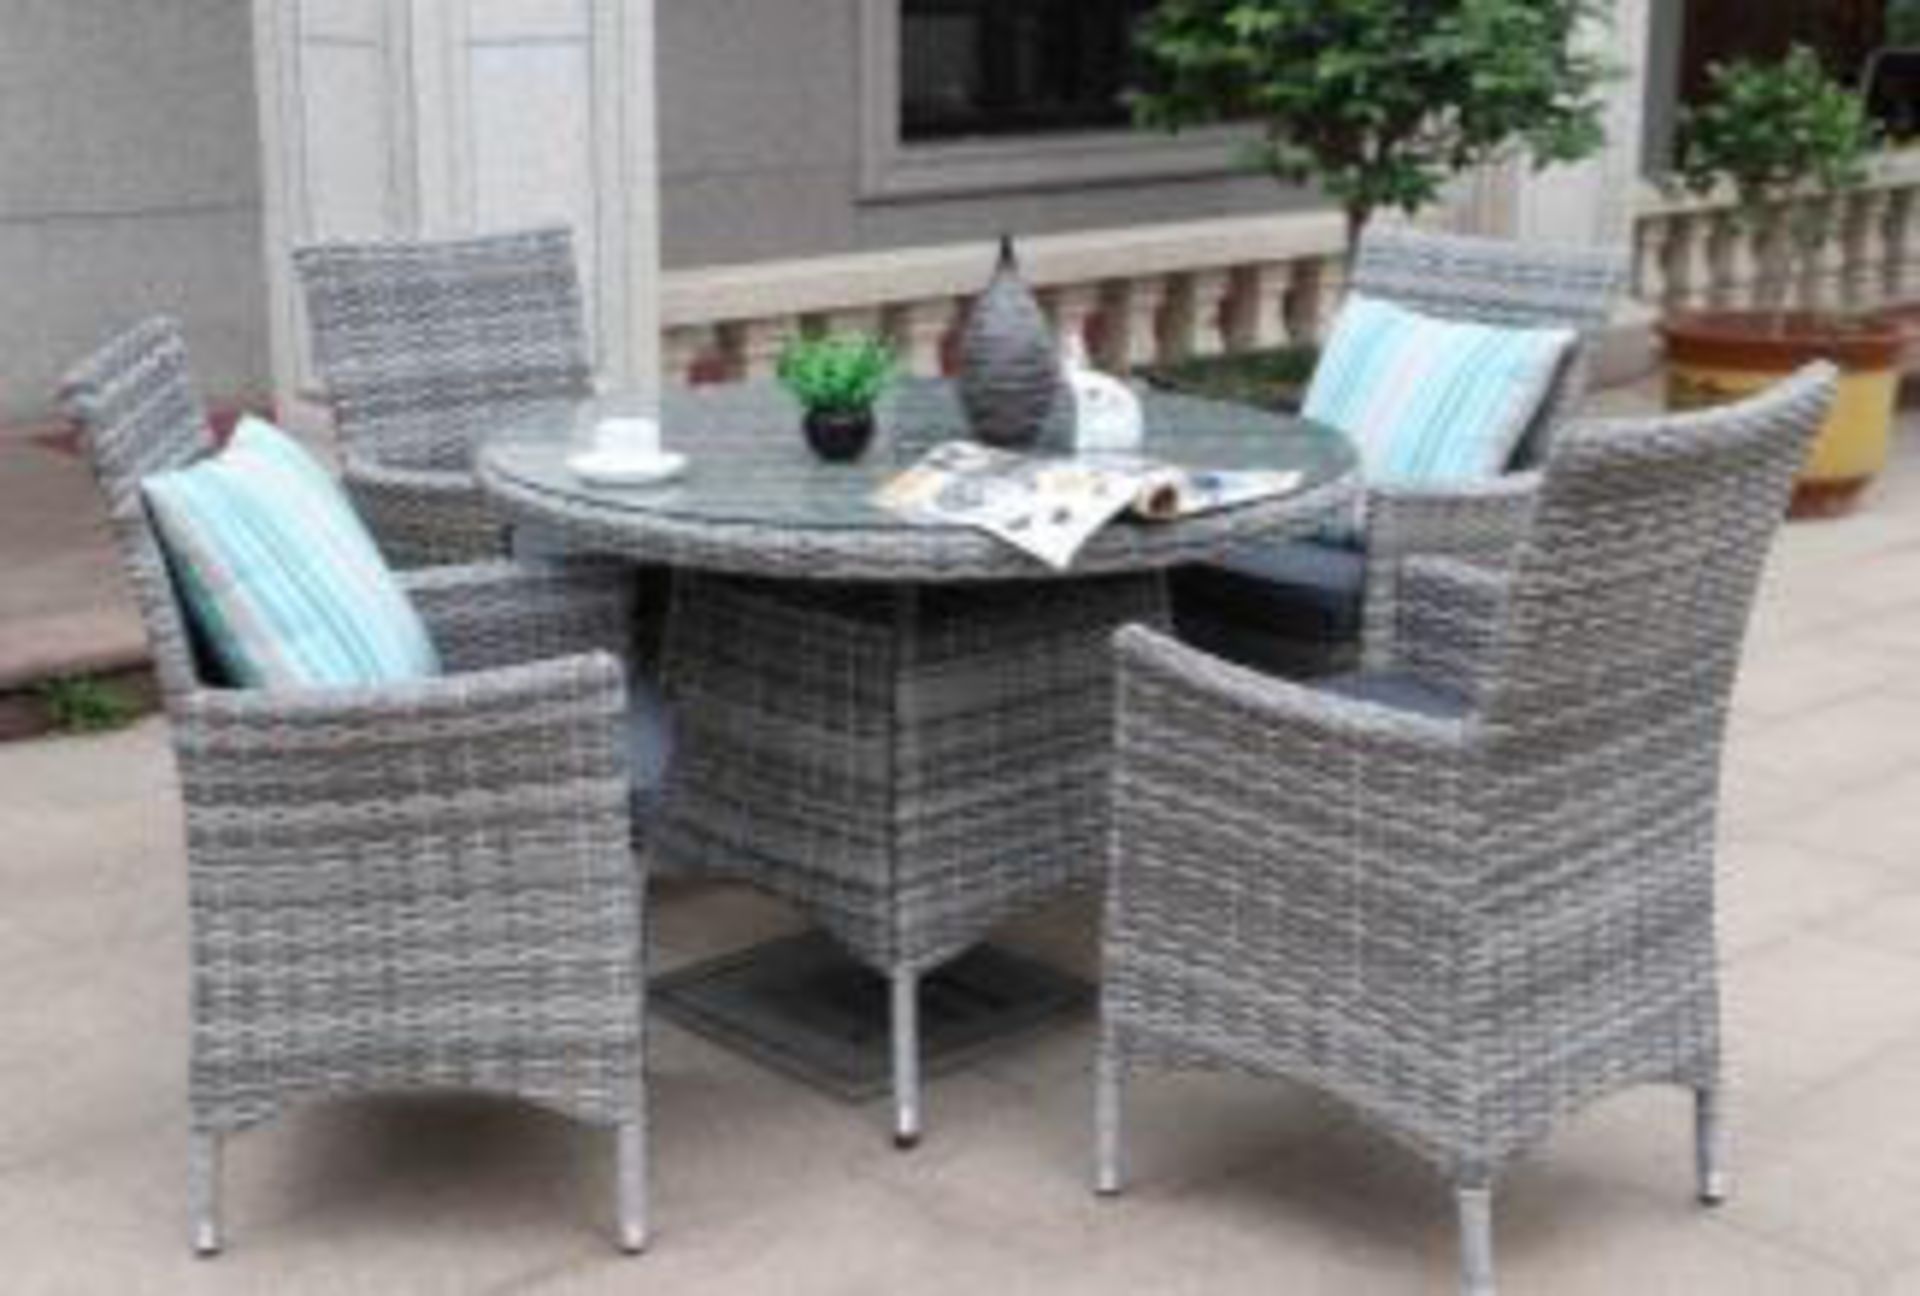 + VAT Brand New Chelsea Garden Company 4-Person Grey Dining Set With Cushions - Aluminium Frame -